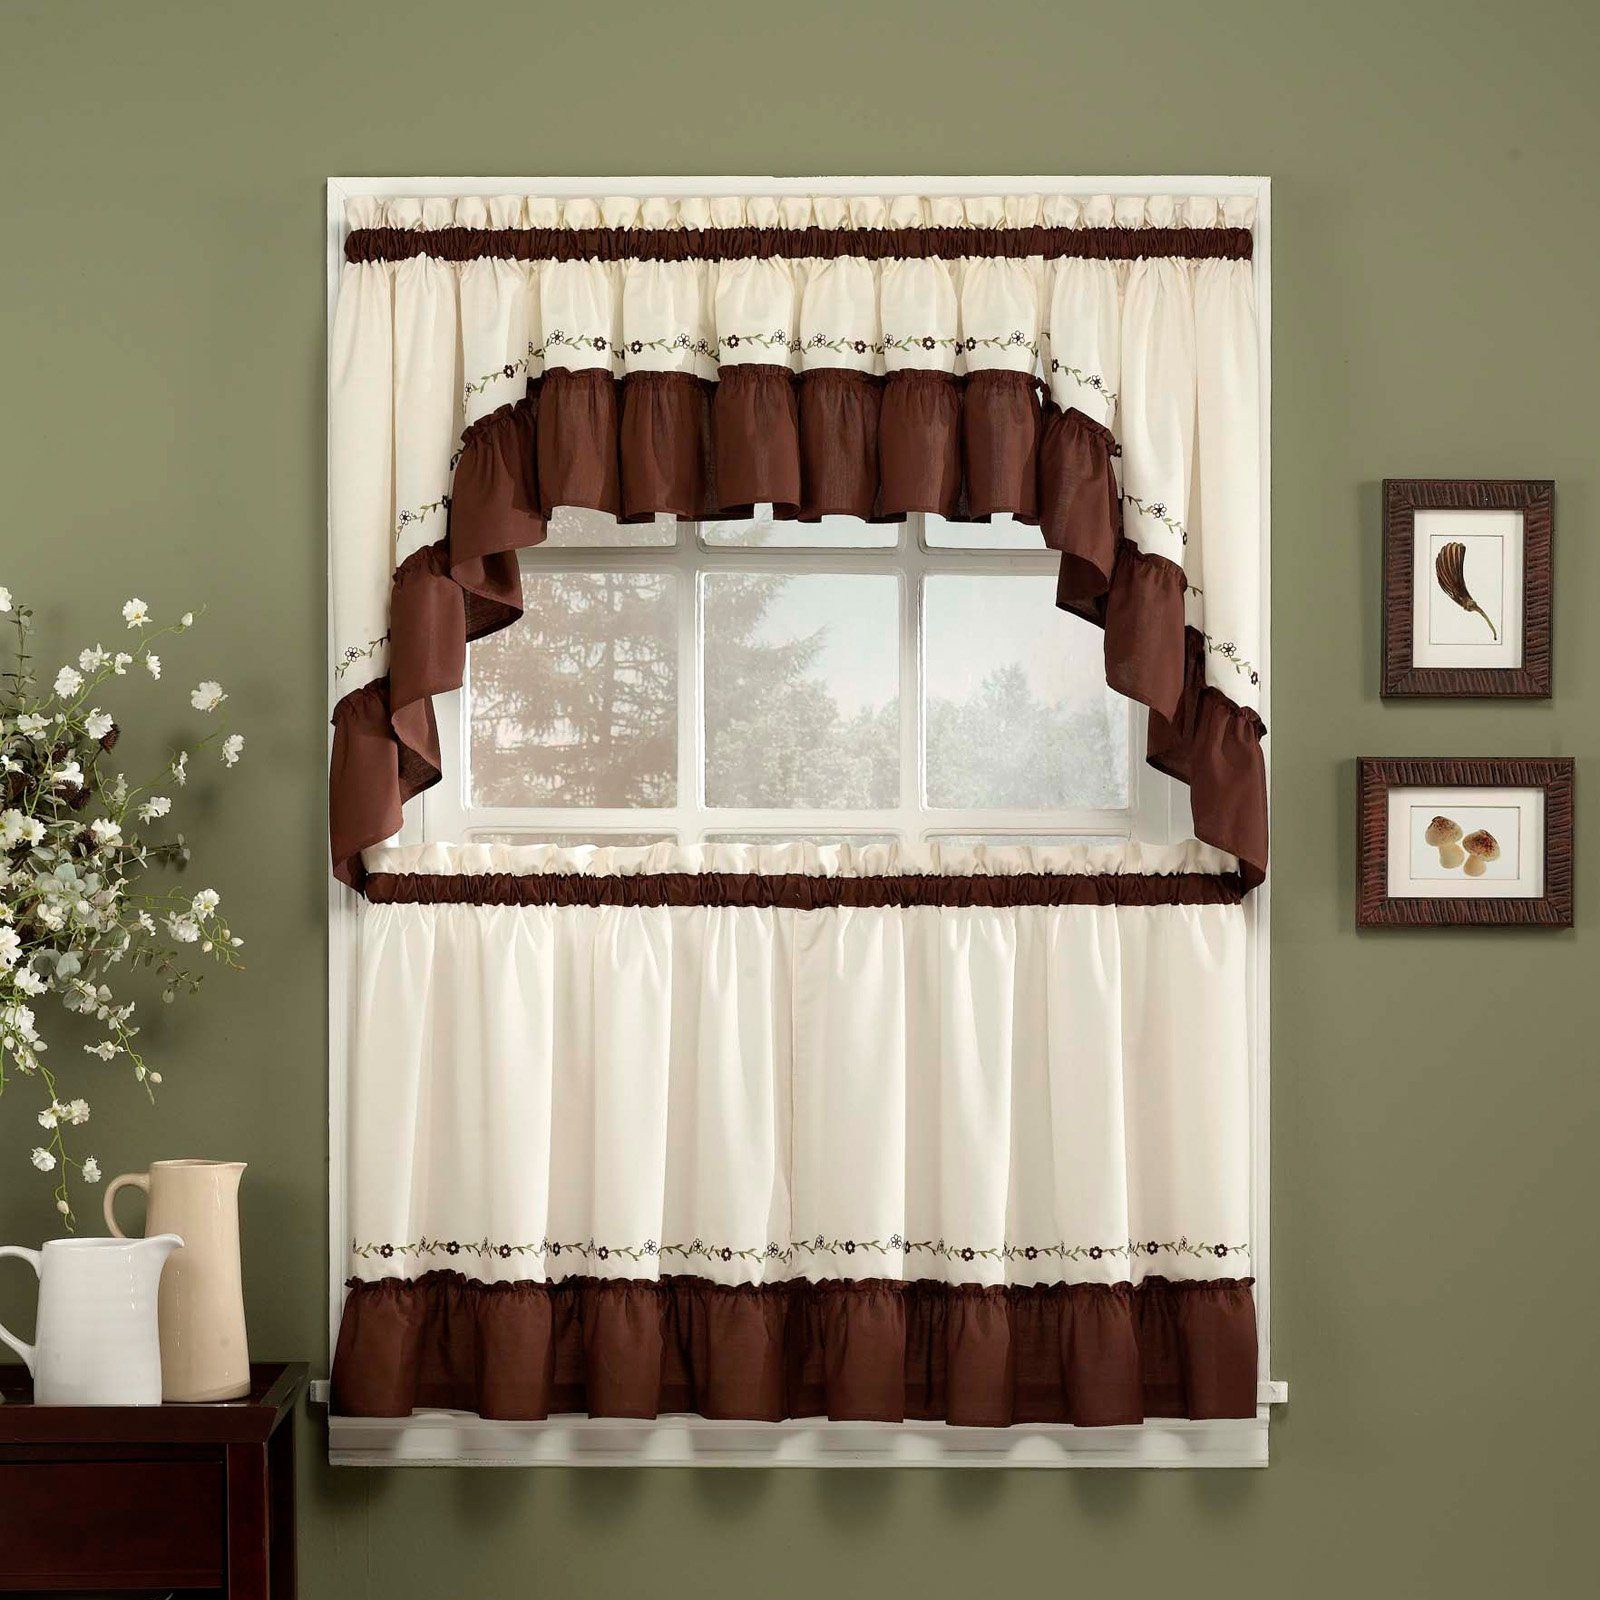 Chf Industries Jayden Window Swag – One Pair Chocolate In For Traditional Tailored Tier And Swag Window Curtains Sets With Ornate Flower Garden Print (Photo 8 of 20)